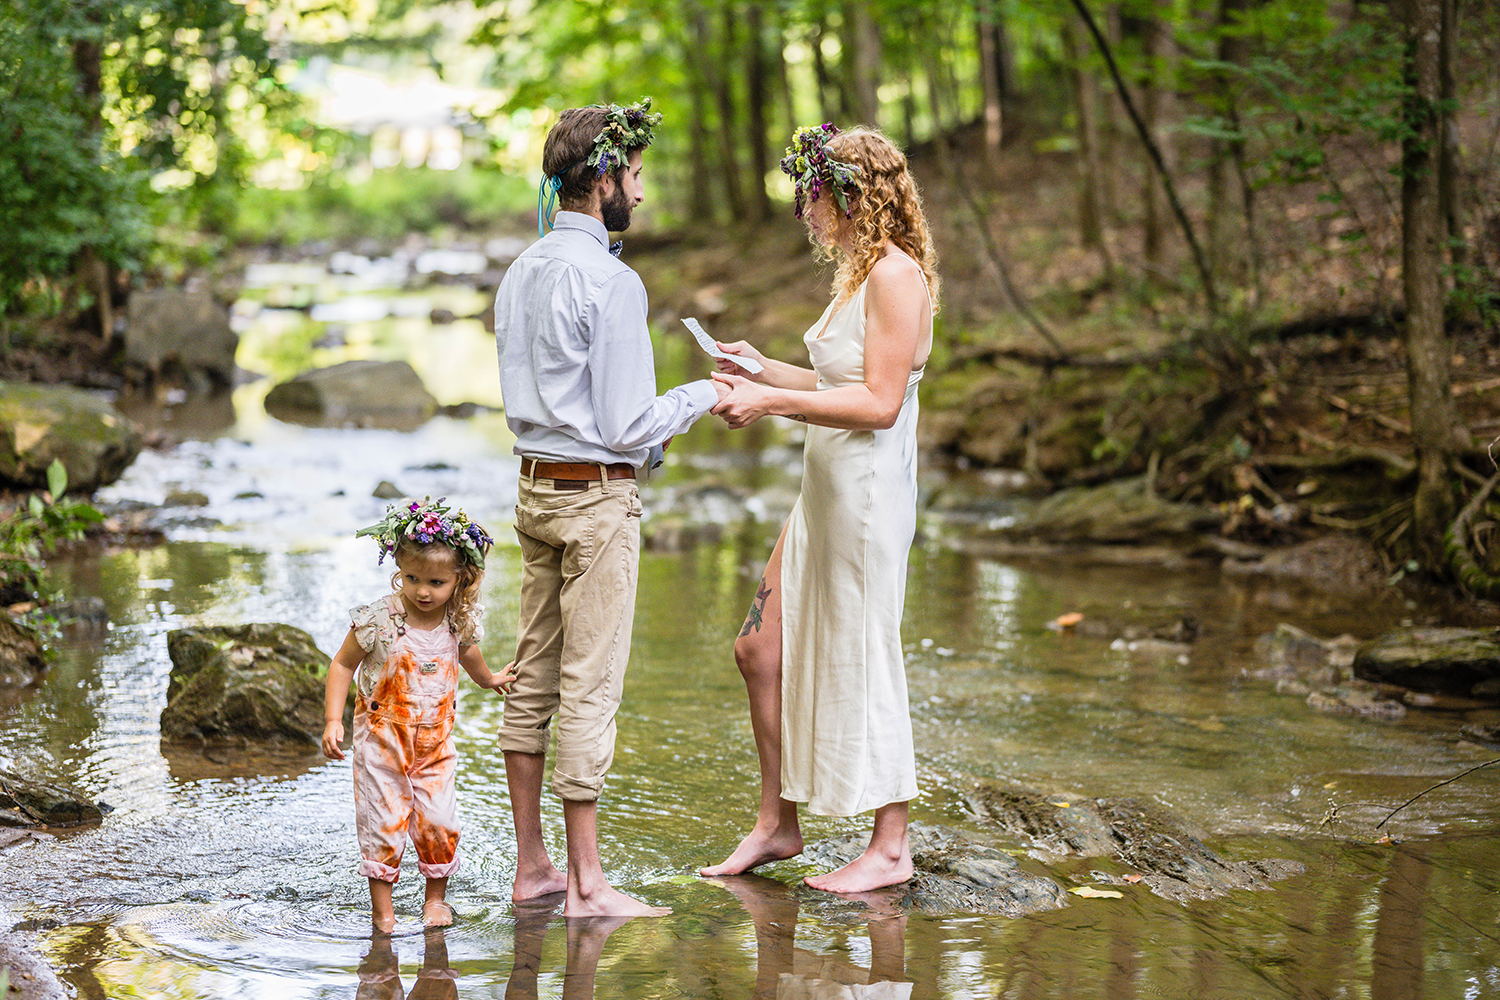 A couple renews their vows in the shallow waters at Fishburn Park in Roanoke, Virginia. A small child tugs at her parent's pants to try to get their attention.